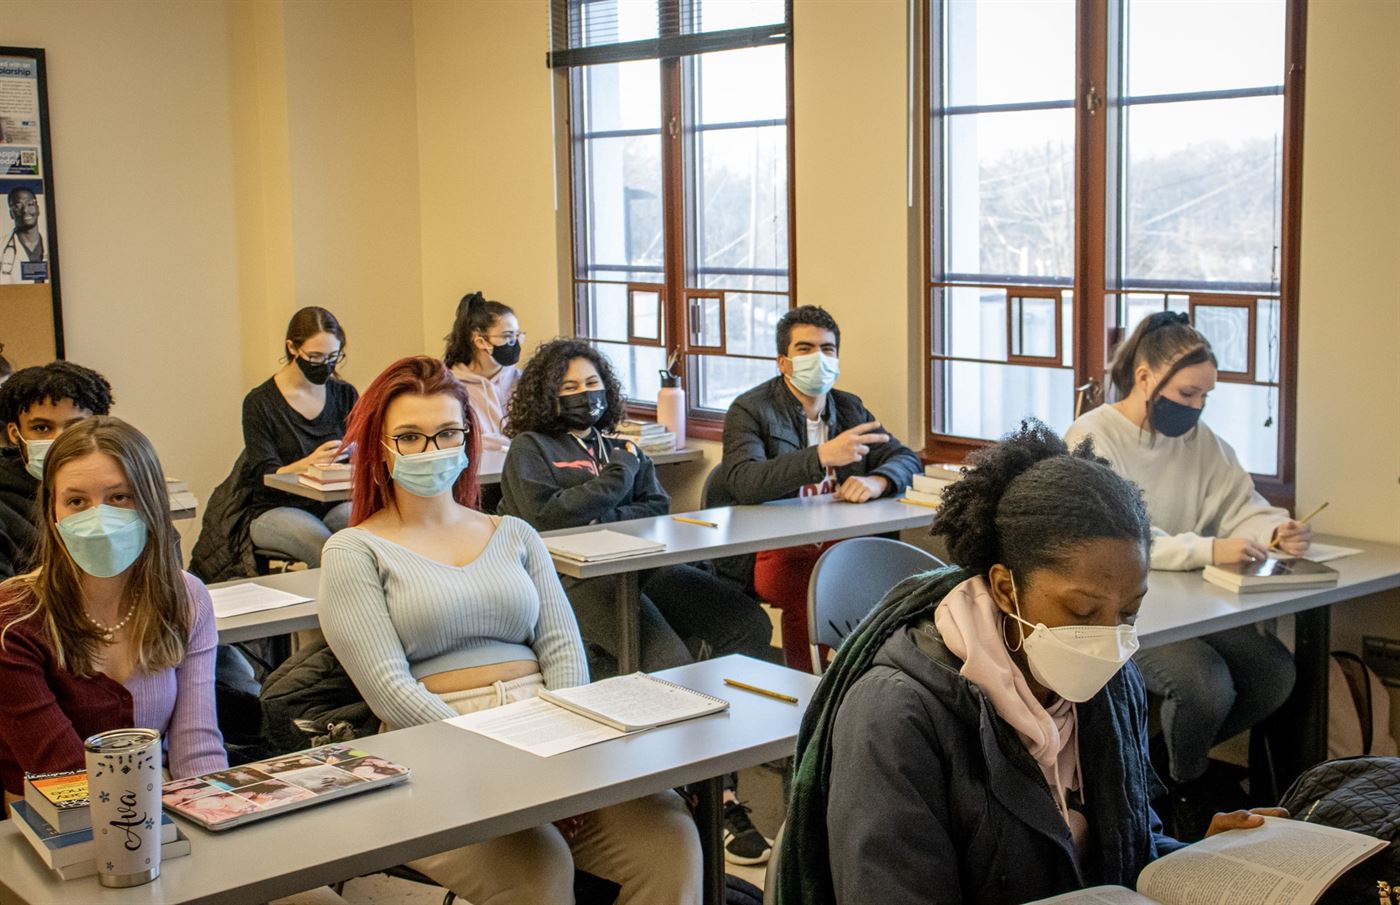 Students learning in a classroom at University Hall. John LaRosa | The Montclarion